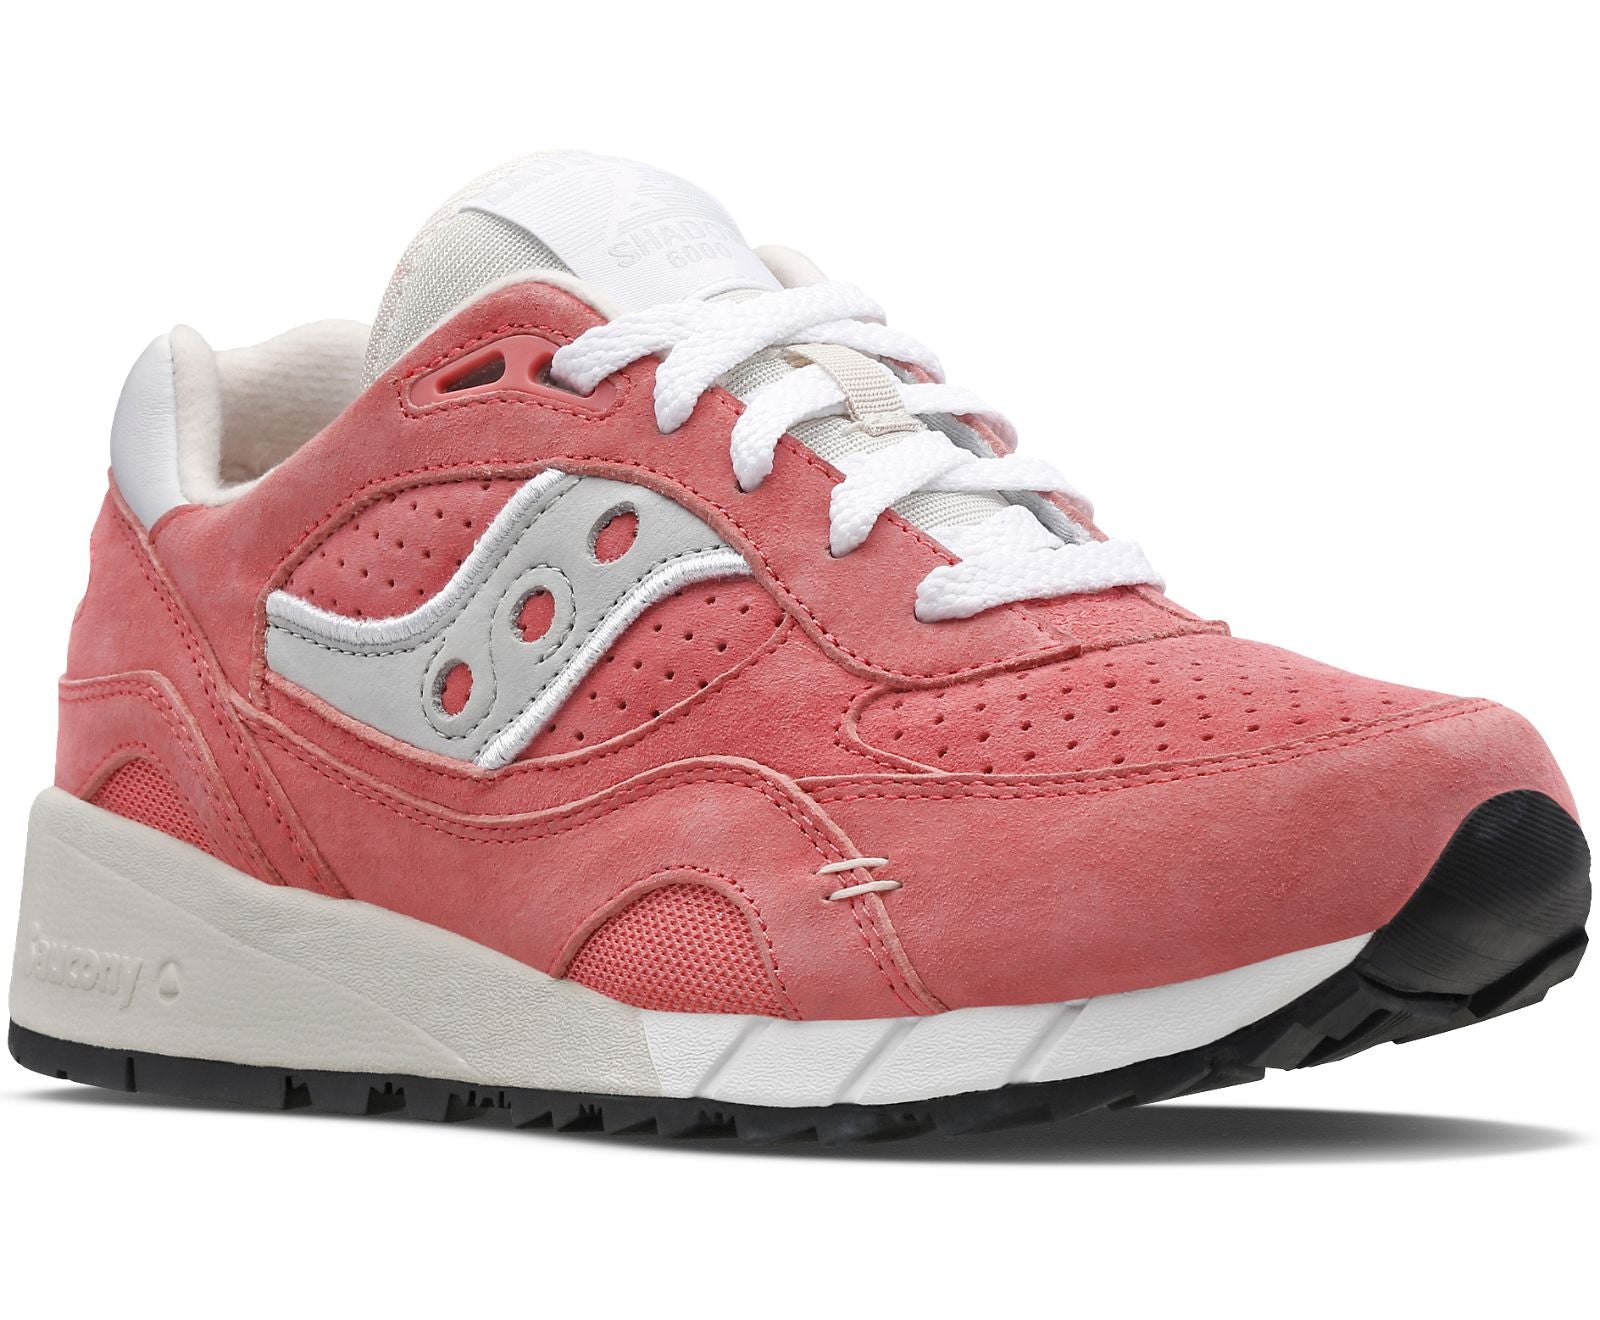 With the use of premium materials and exciting new colorways, the Saucony Shadow 6000 Full Suede Pack celebrates the values that Saucony is built on. For a laid-back approach, the Shadow 6000 layers light tone on tone color to create a monochromatic feel. A Saucony signature light grey logo finishes off the overall look with reflective print and stitching. A figure reminiscent of the catwalk’s full white trends, this special pack is guaranteed to be styled for many seasons to come.